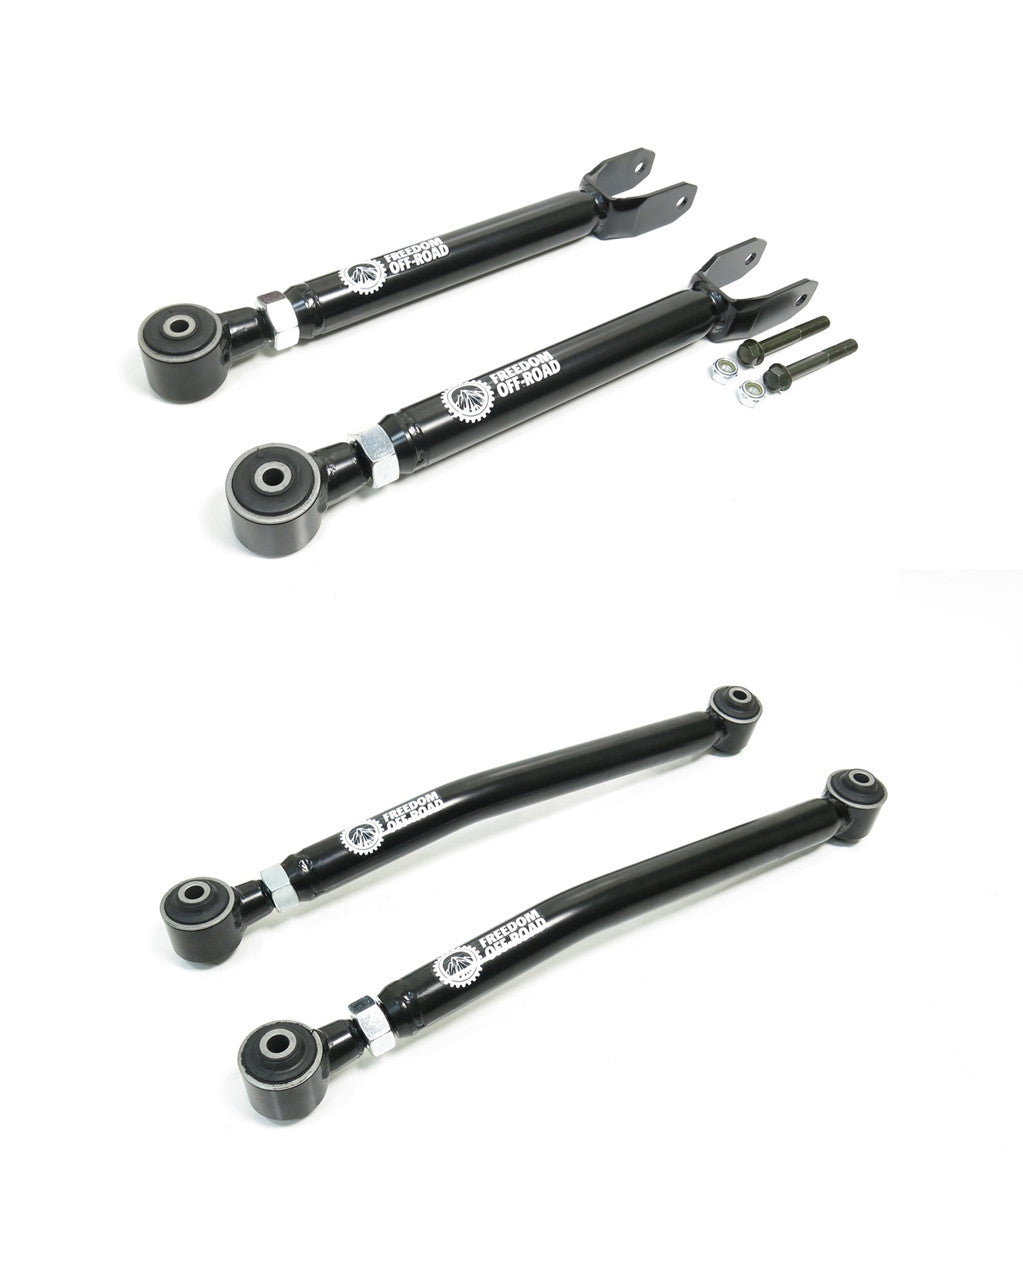 FREEDOM OFF-ROAD UPPER+LOWER CONTROL ARMS: JEEP WRANGLER JK 07-18(0-4.5" LIFT)